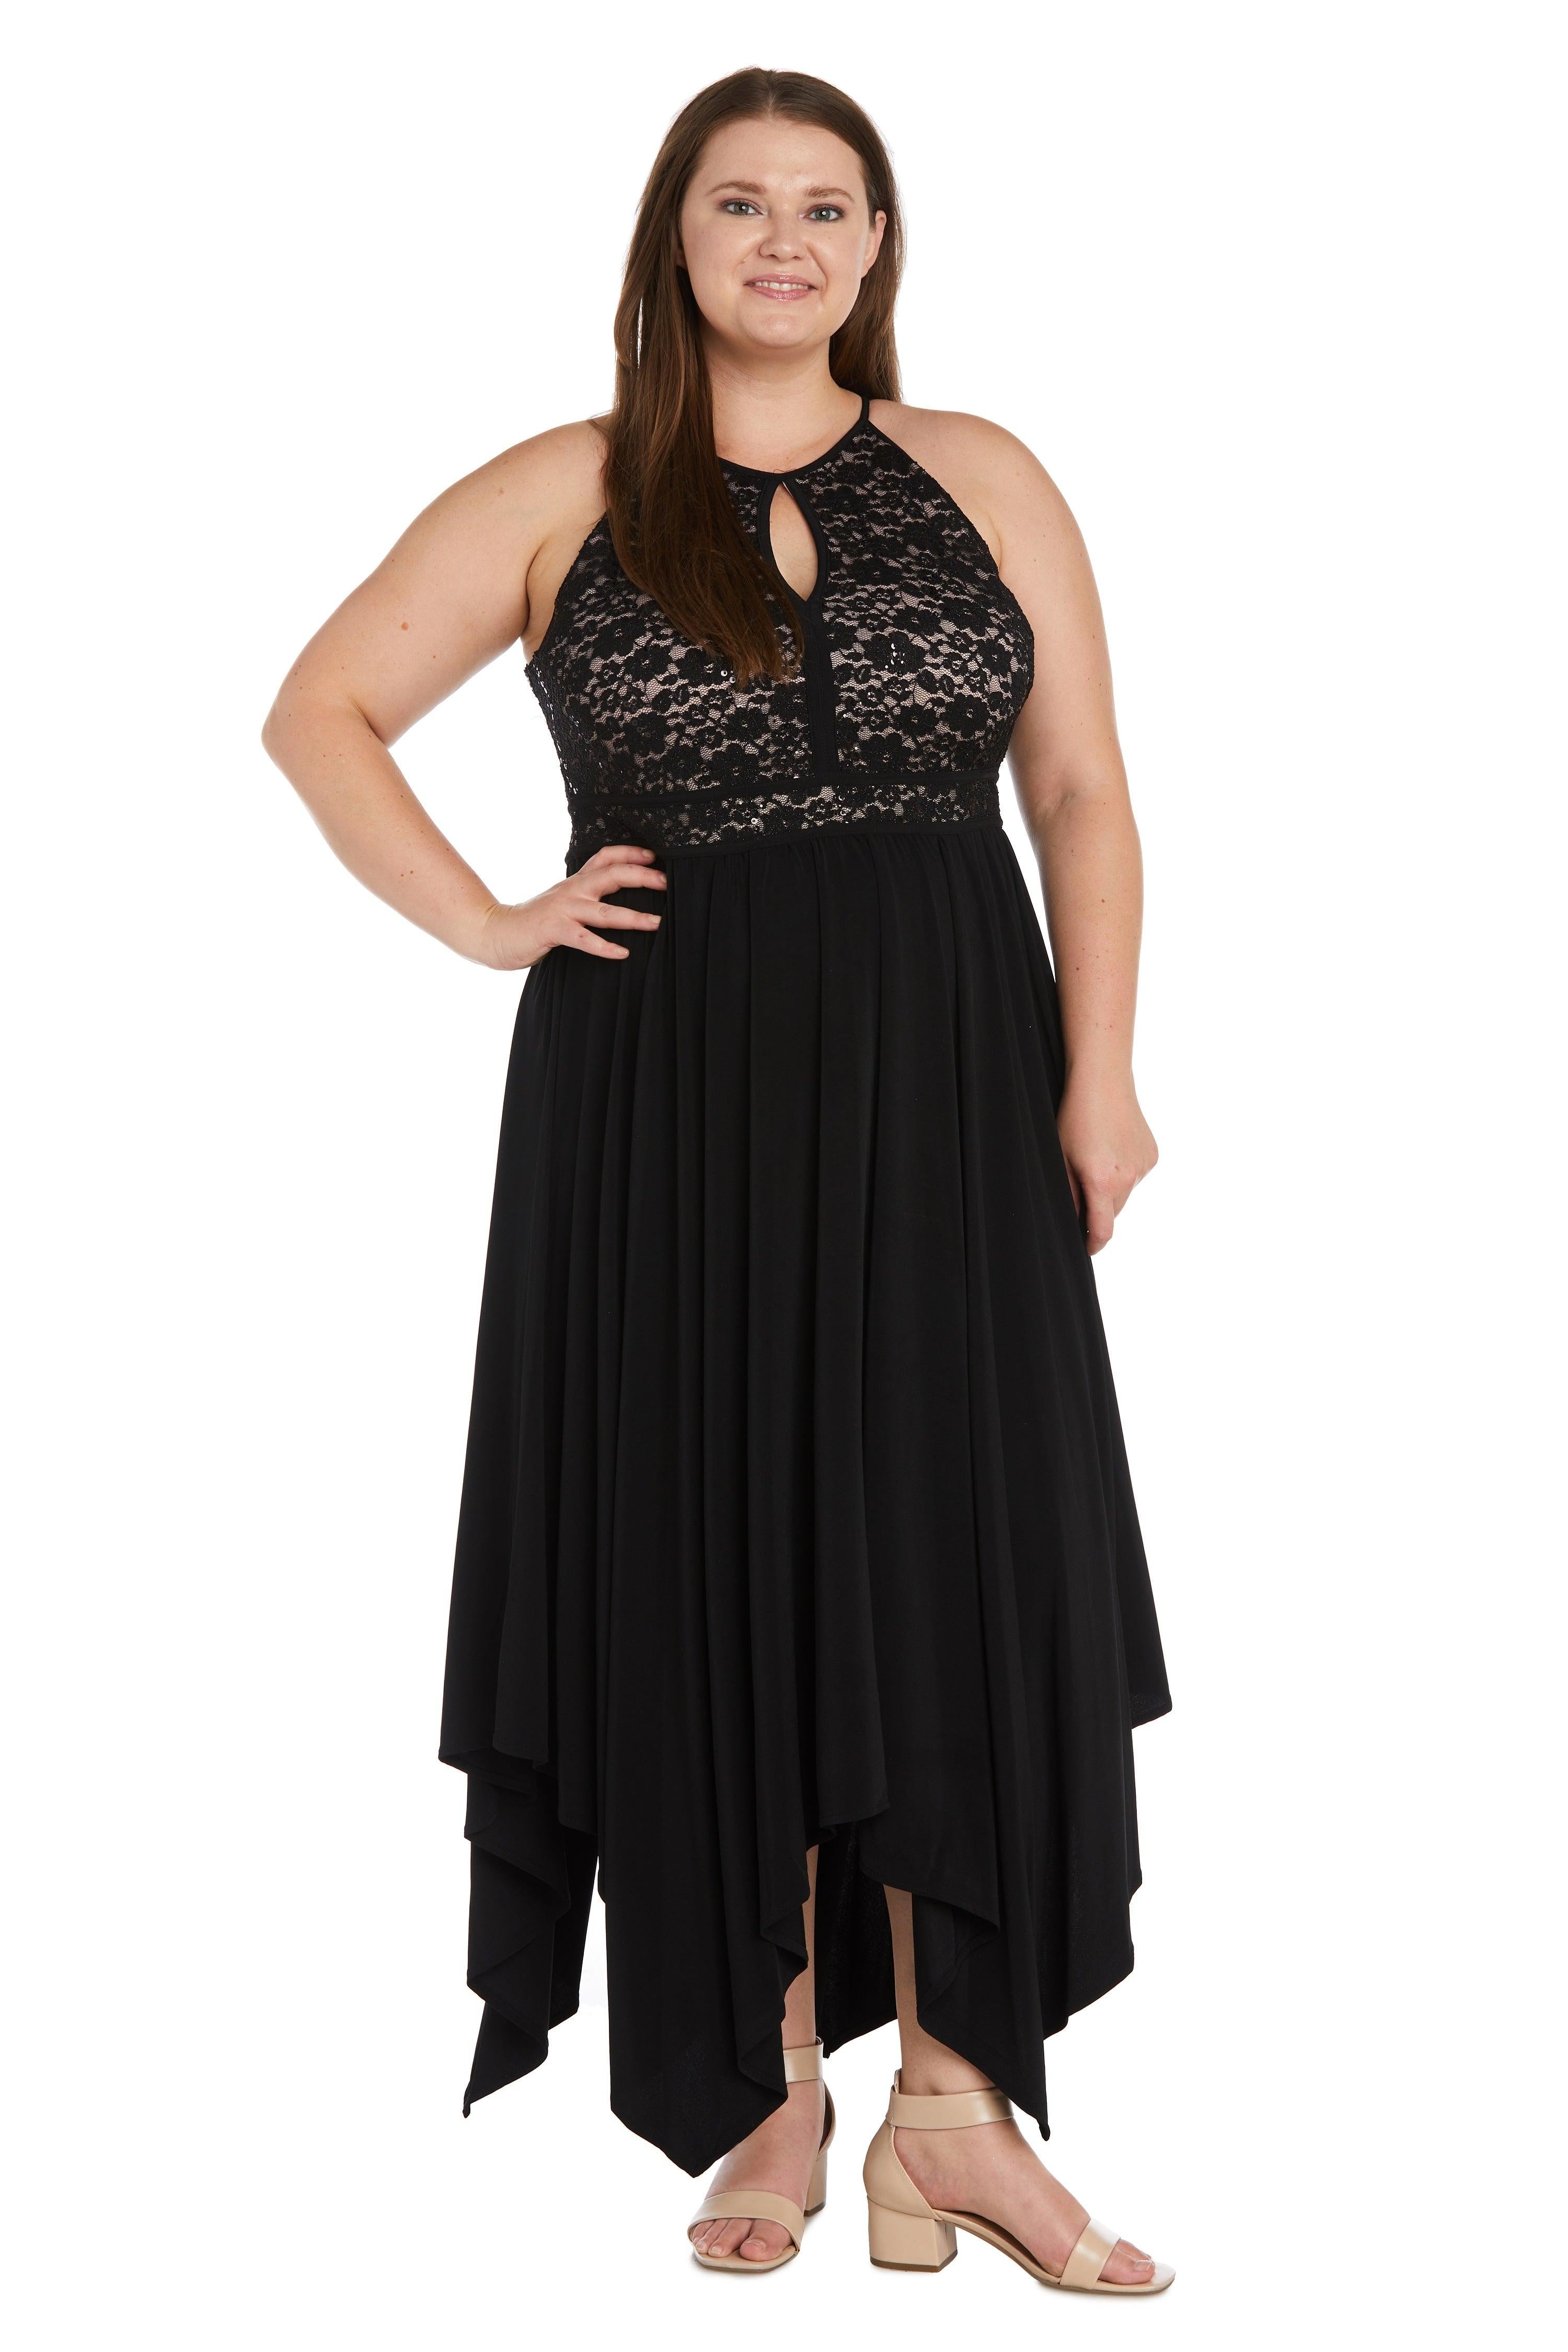 Nightway High Low Plus Size Formal Dress 21946W | The Dress Outlet